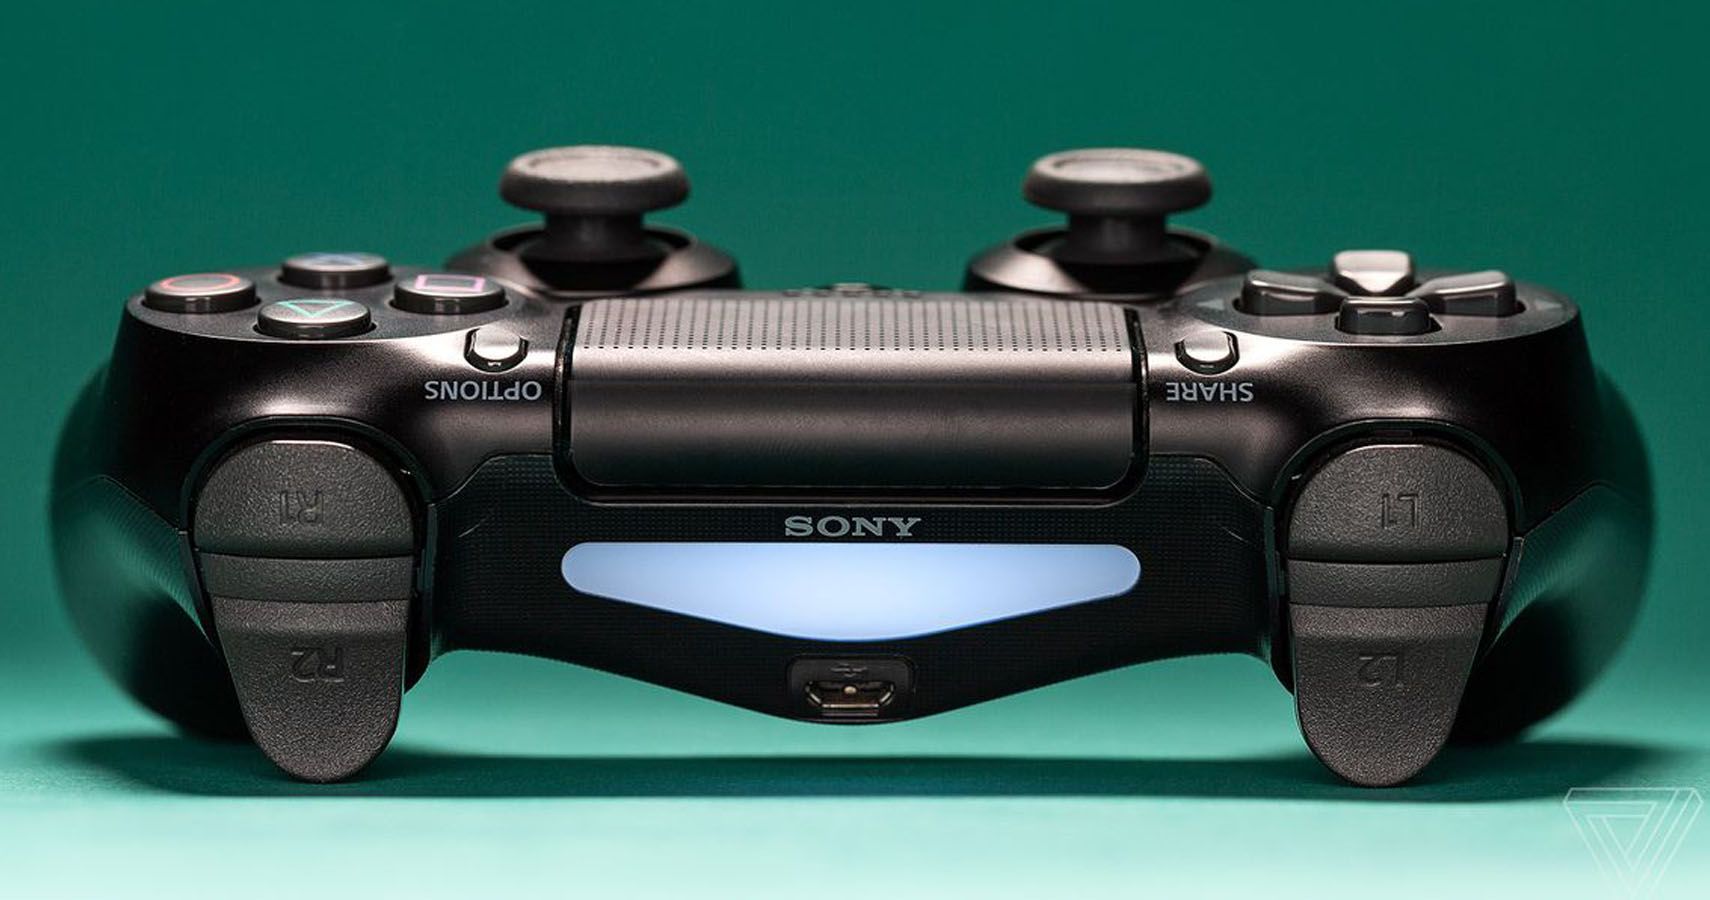 ps4 controller with lights